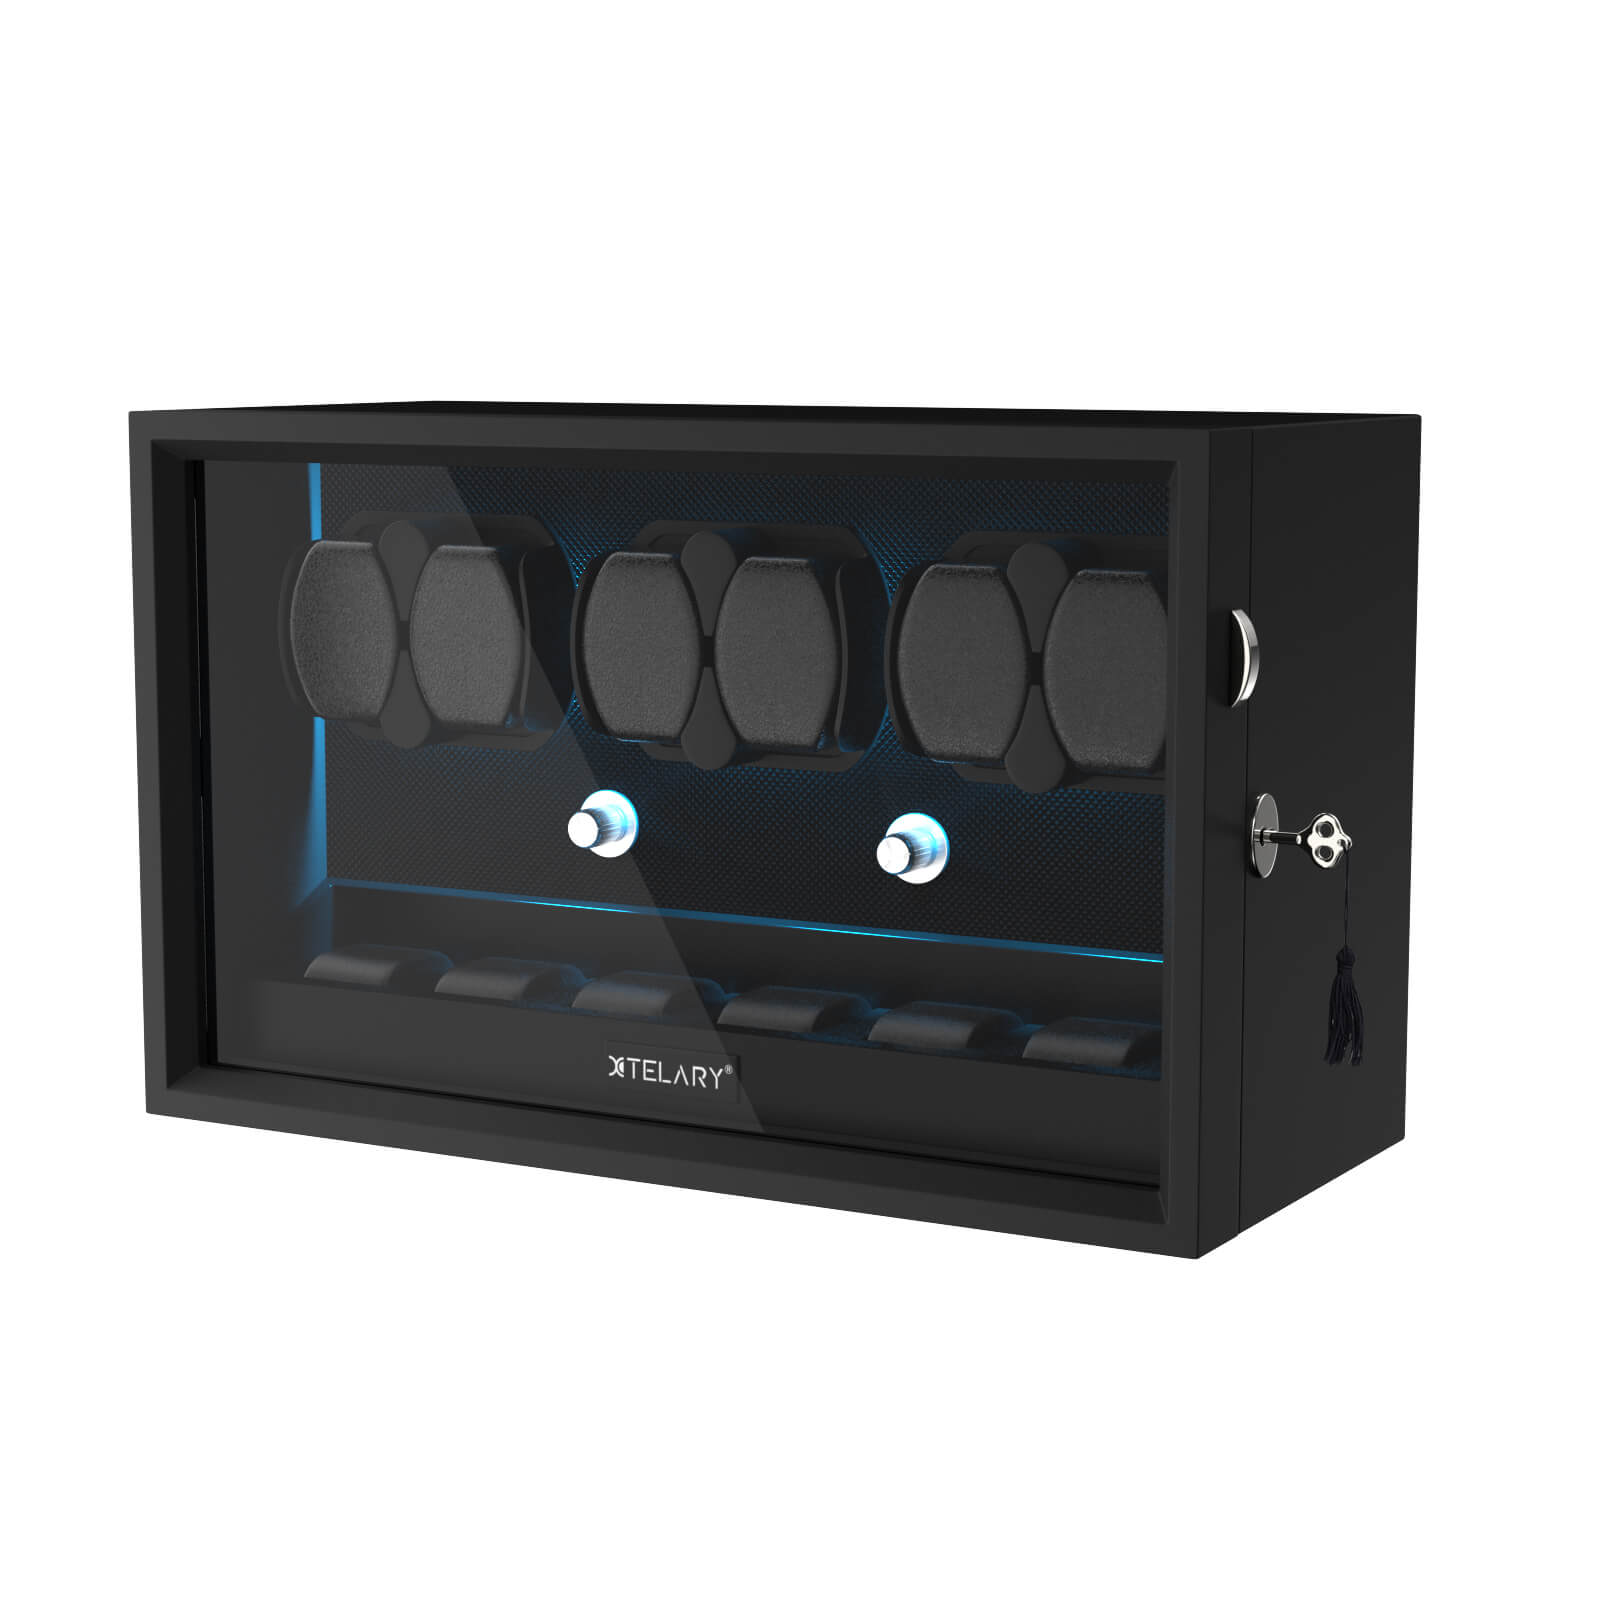 6 Watch Winders for Automatic Watches with 6 Extra Storage Aurora Blue LED Light - Black